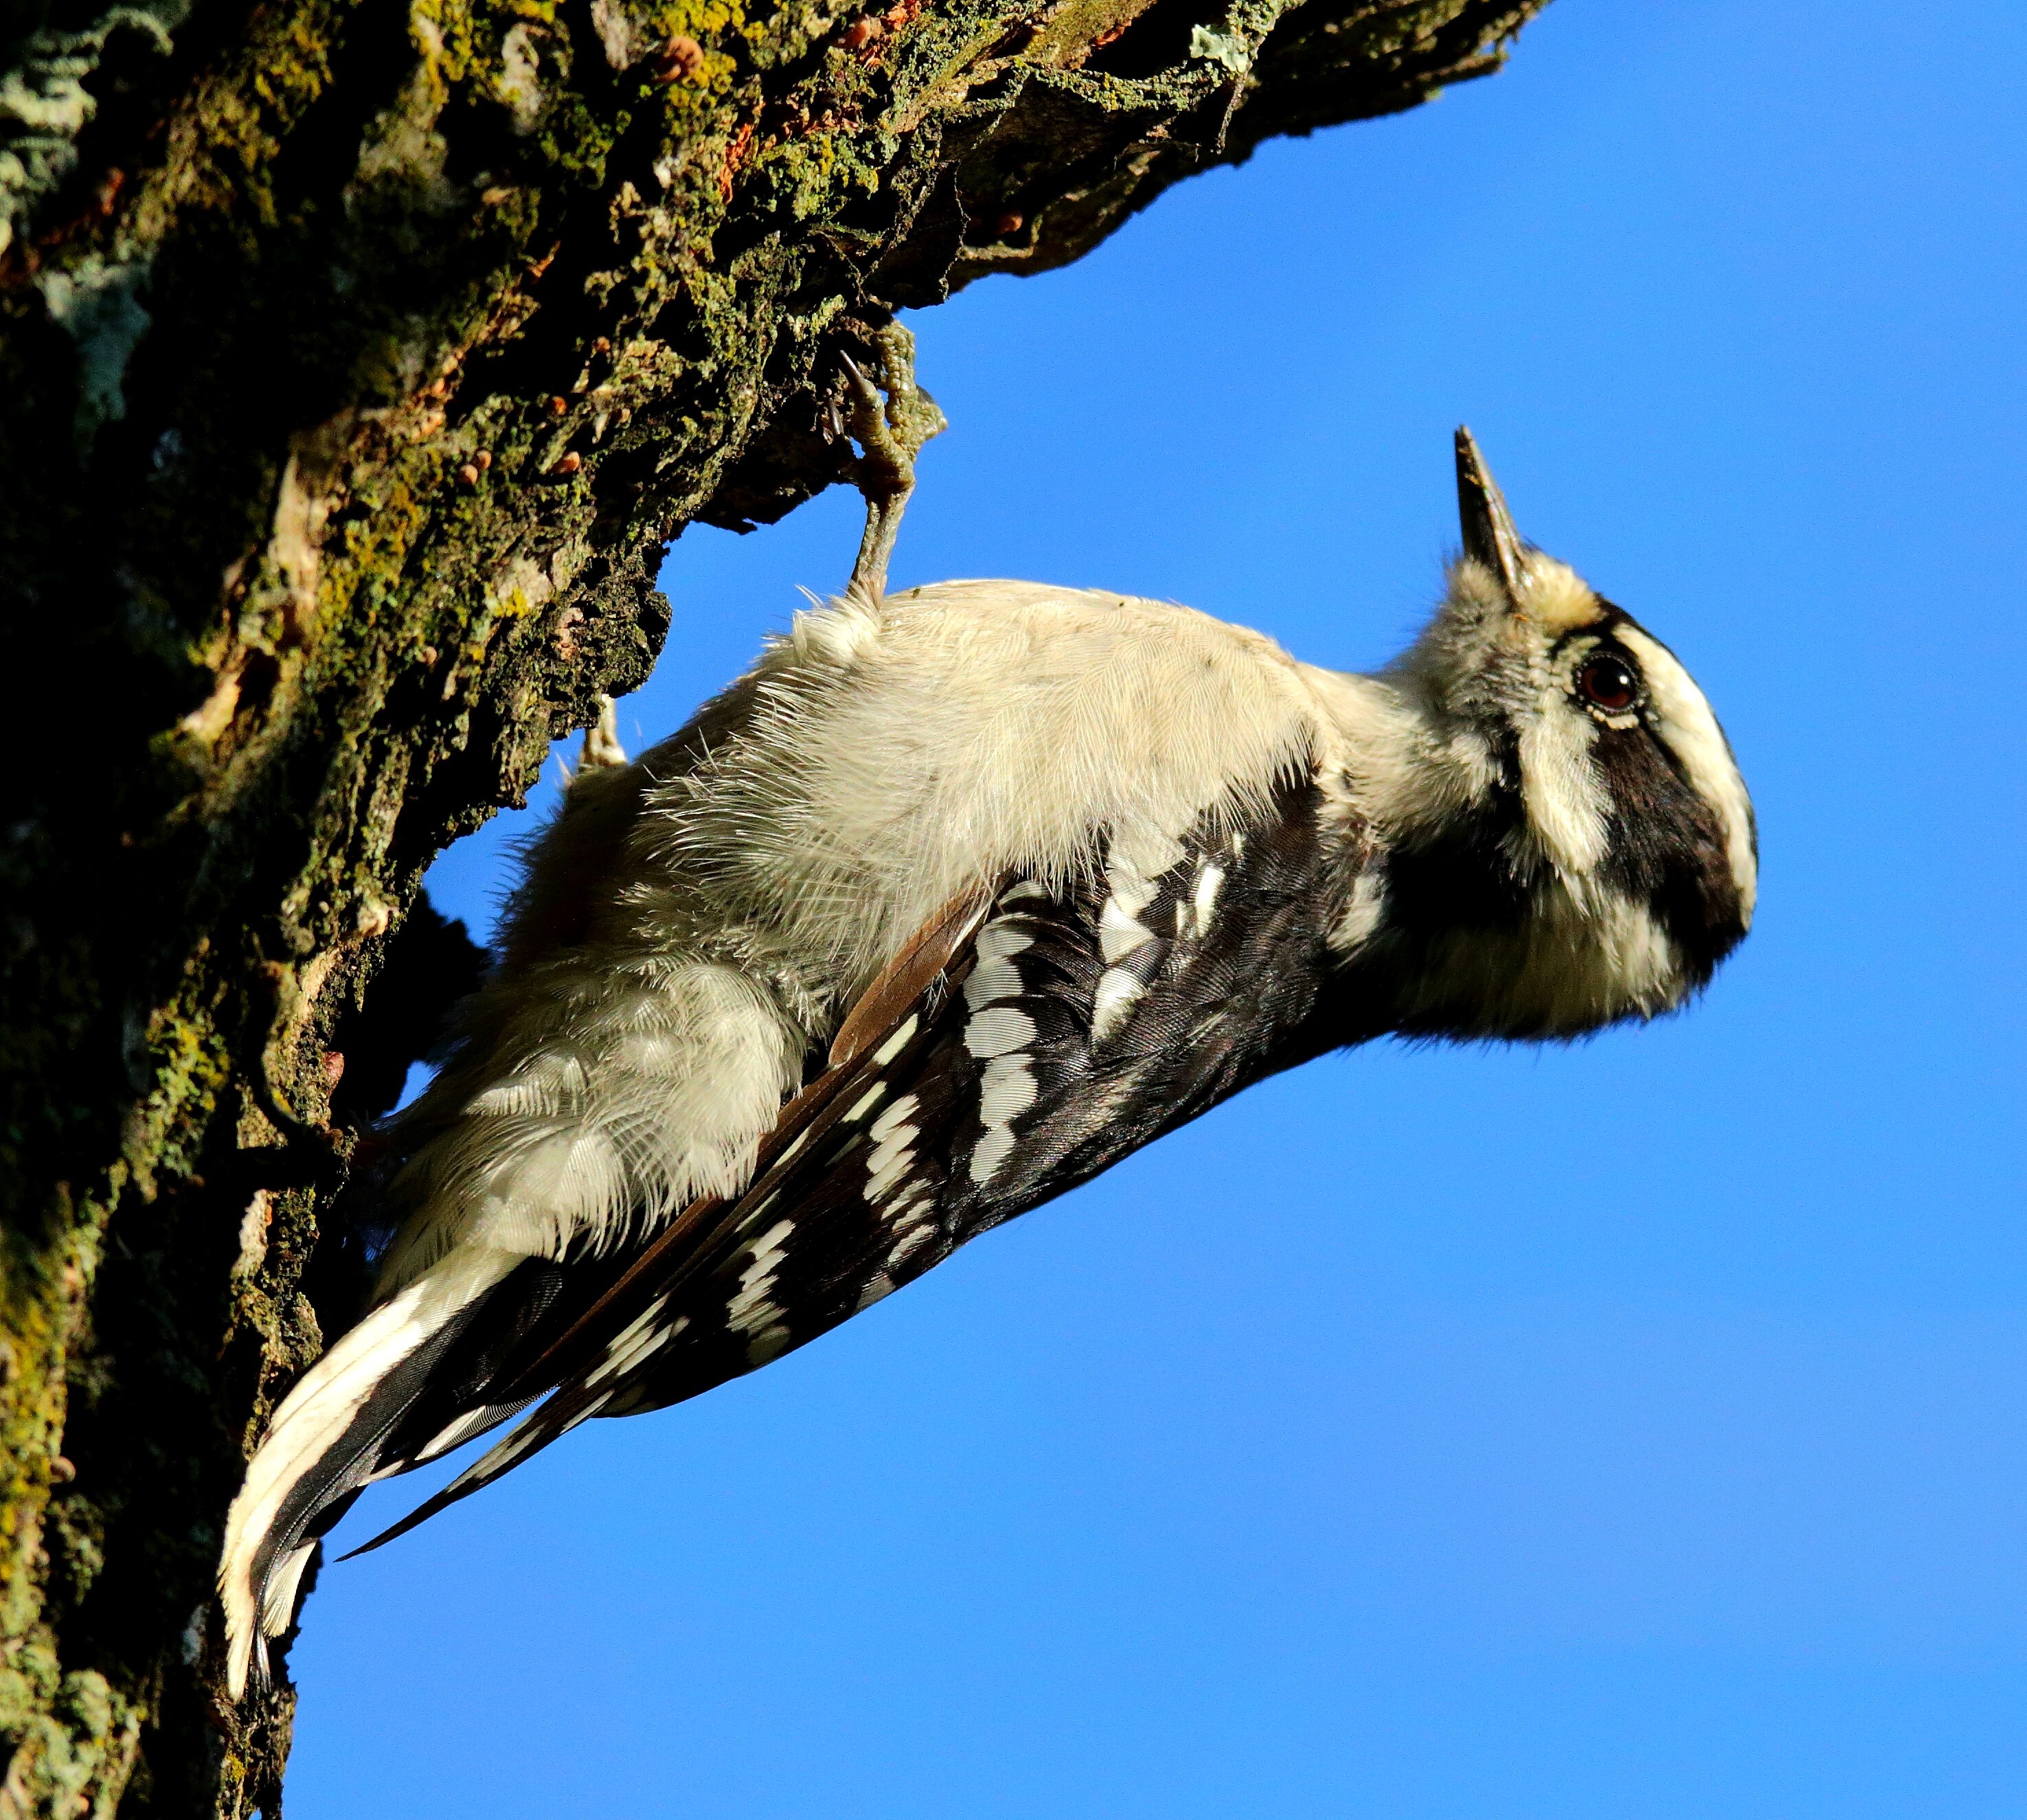 A female Downy Woodpecker at work. Photo: <a href="https://www.flickr.com/photos/120553232@N02/" target="_blank">Isaac Grant</a>